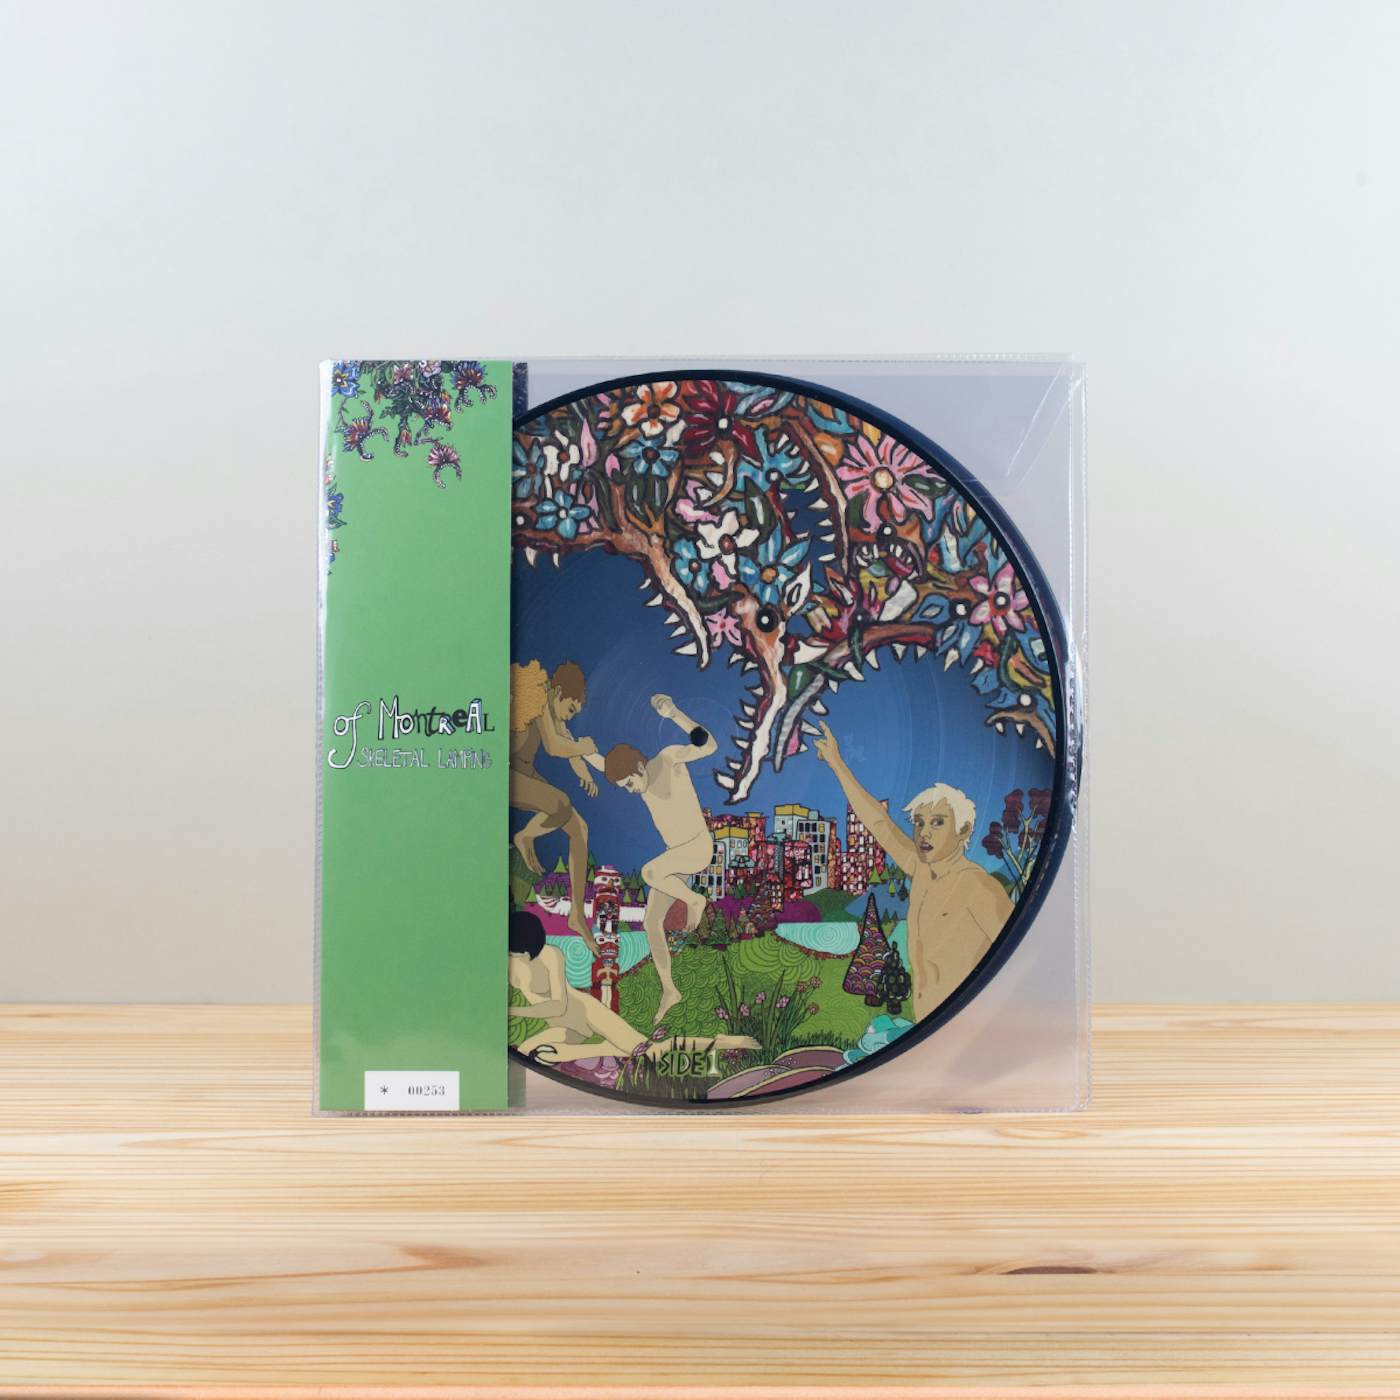 of Montreal Skeletal Lamping (Picture Disc Edition)